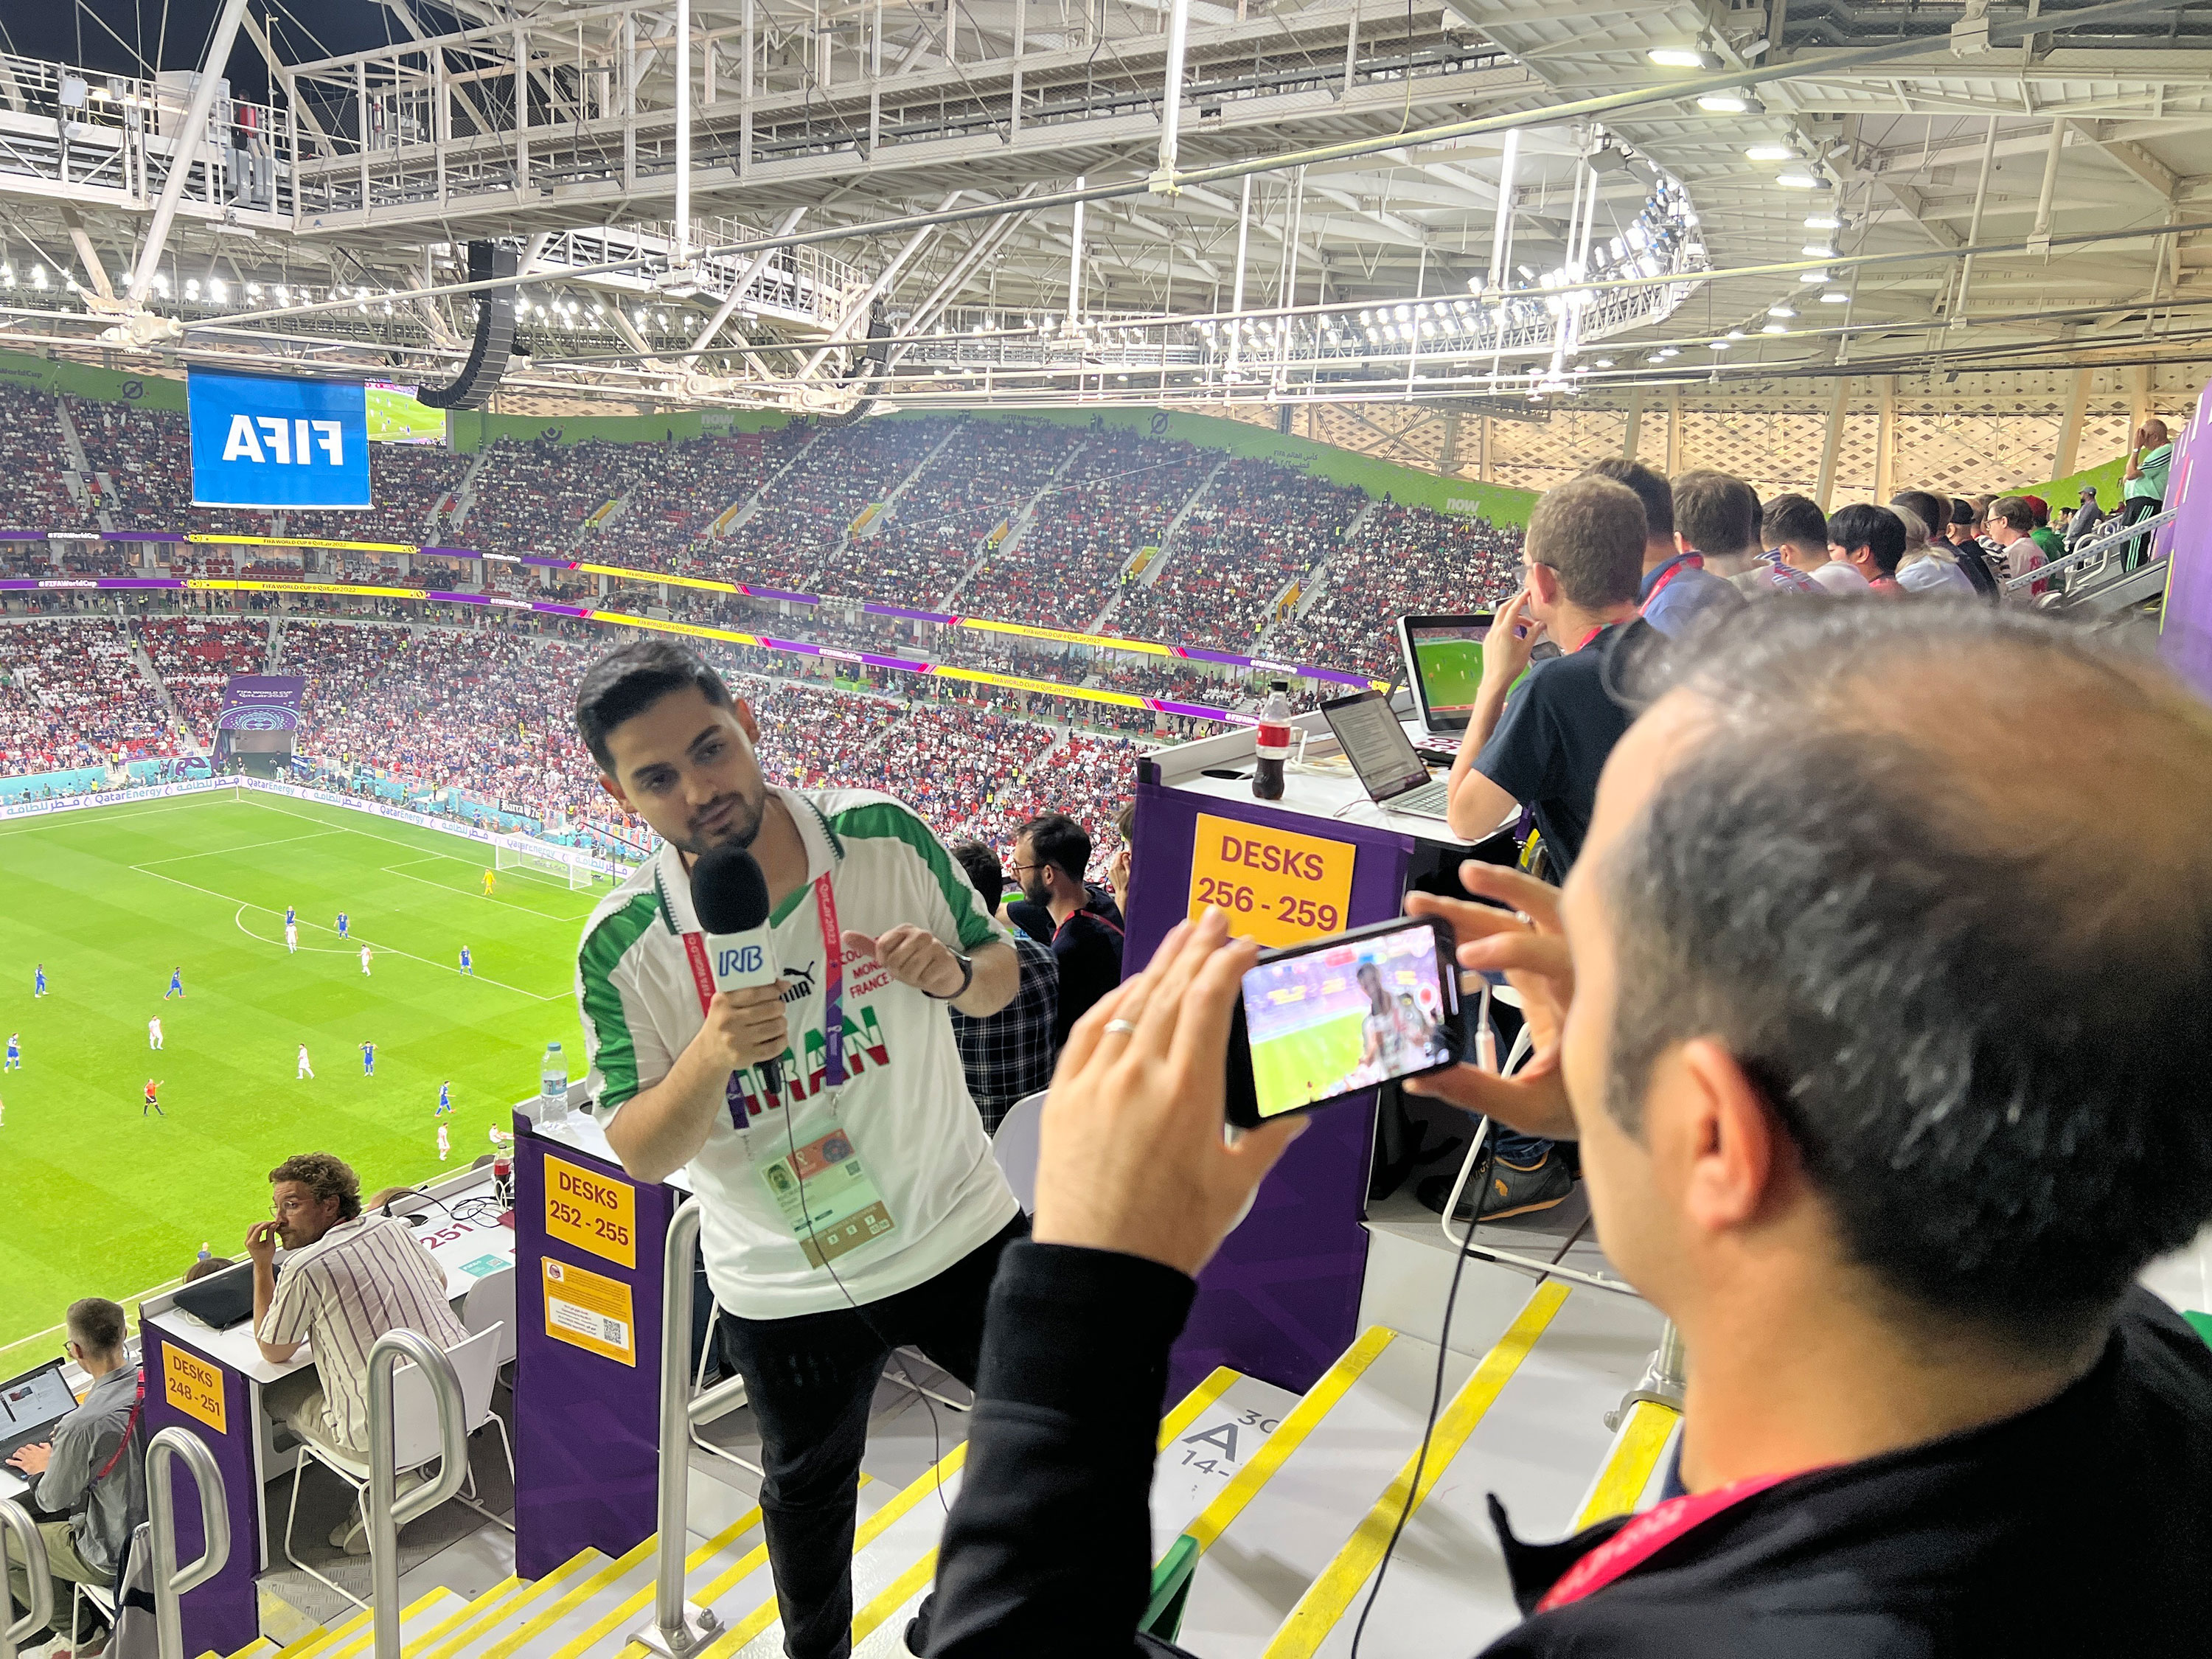 Iran state media (IRIB) reporting from inside the game and wearing the 1998 World Cup shirt.  They'll be hoping for a repeat of that night in France, when Iran knocked out the USA.